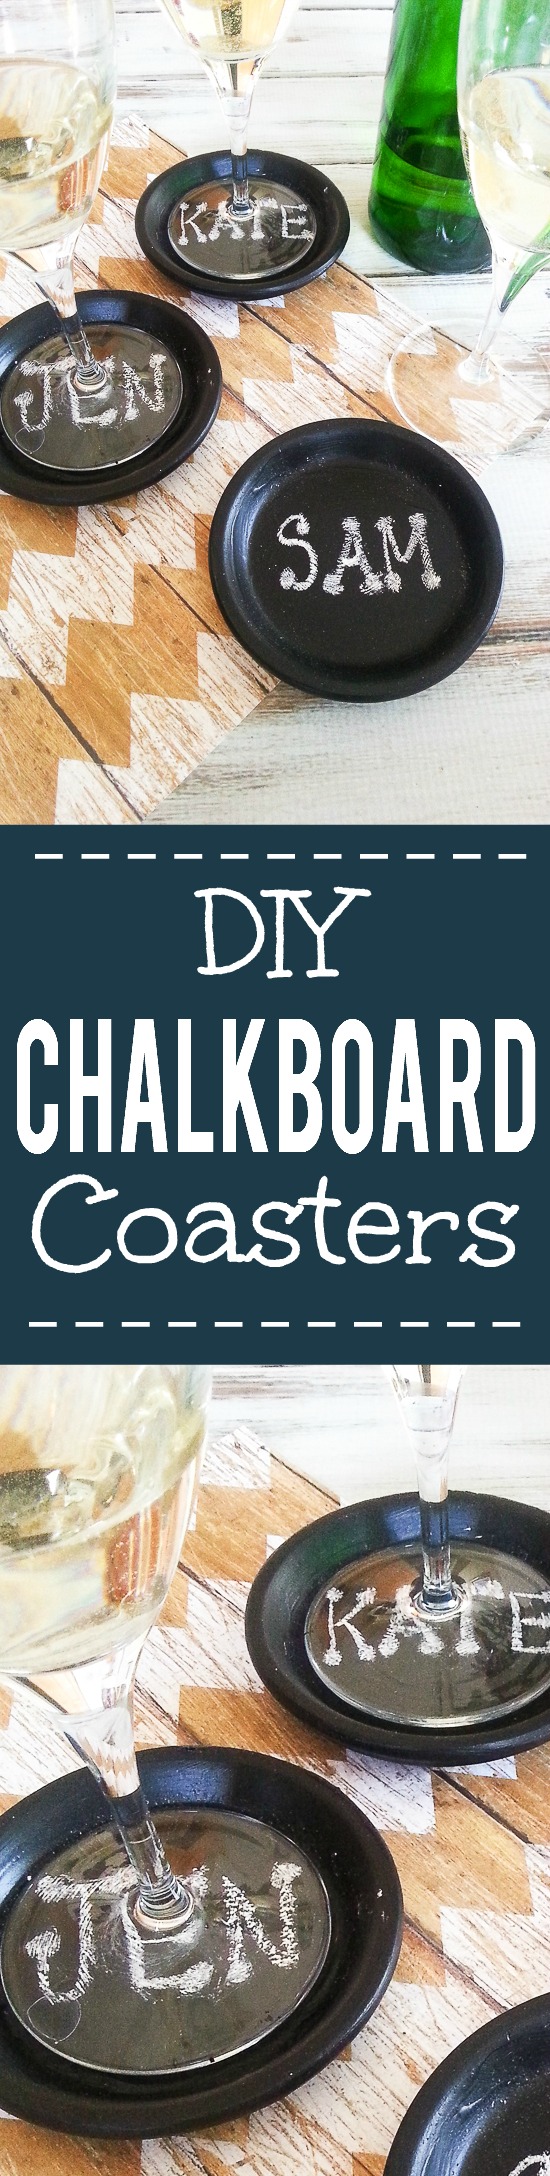 How to Make Easy DIY Chalkboard Coasters { TUTORIAL} - These easy DIY Chalkboard Coasters are perfect for daily use, parties, and even make pretty table settings.  Make these fun coasters with this simple, easy-to-follow tutorial. So cute!